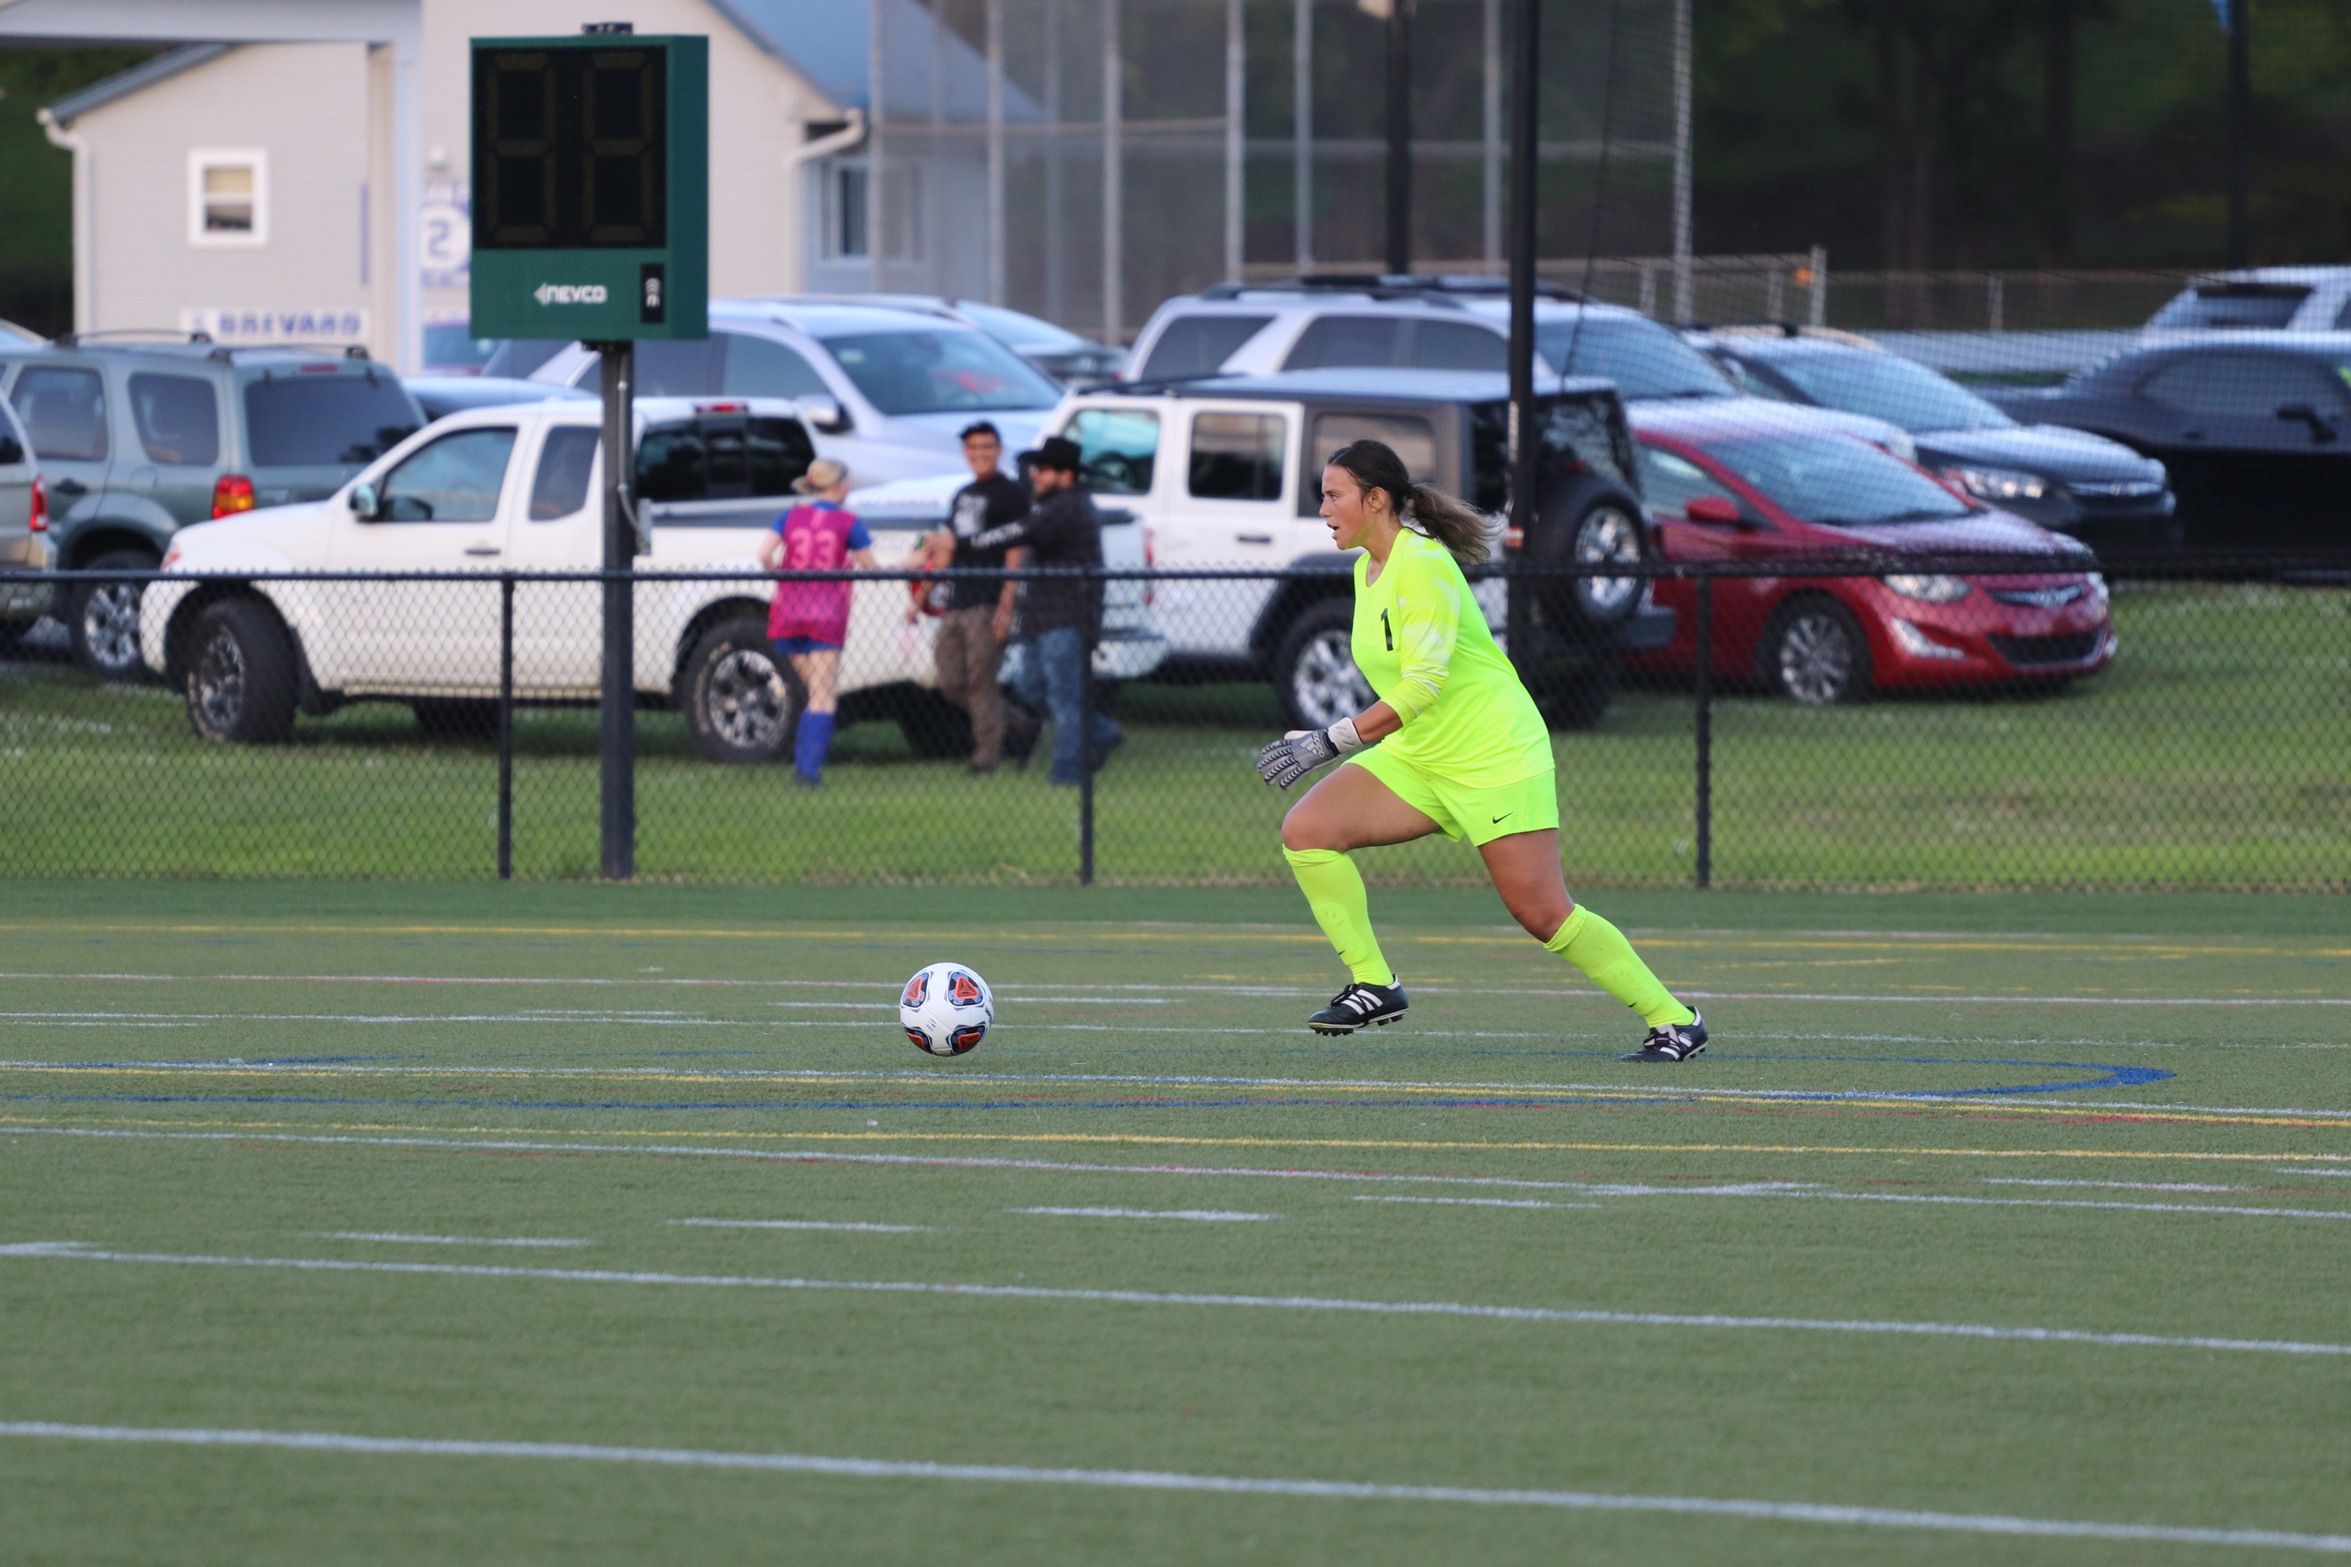 Rojas Matches Career-High Save Total in Setback to Maryville